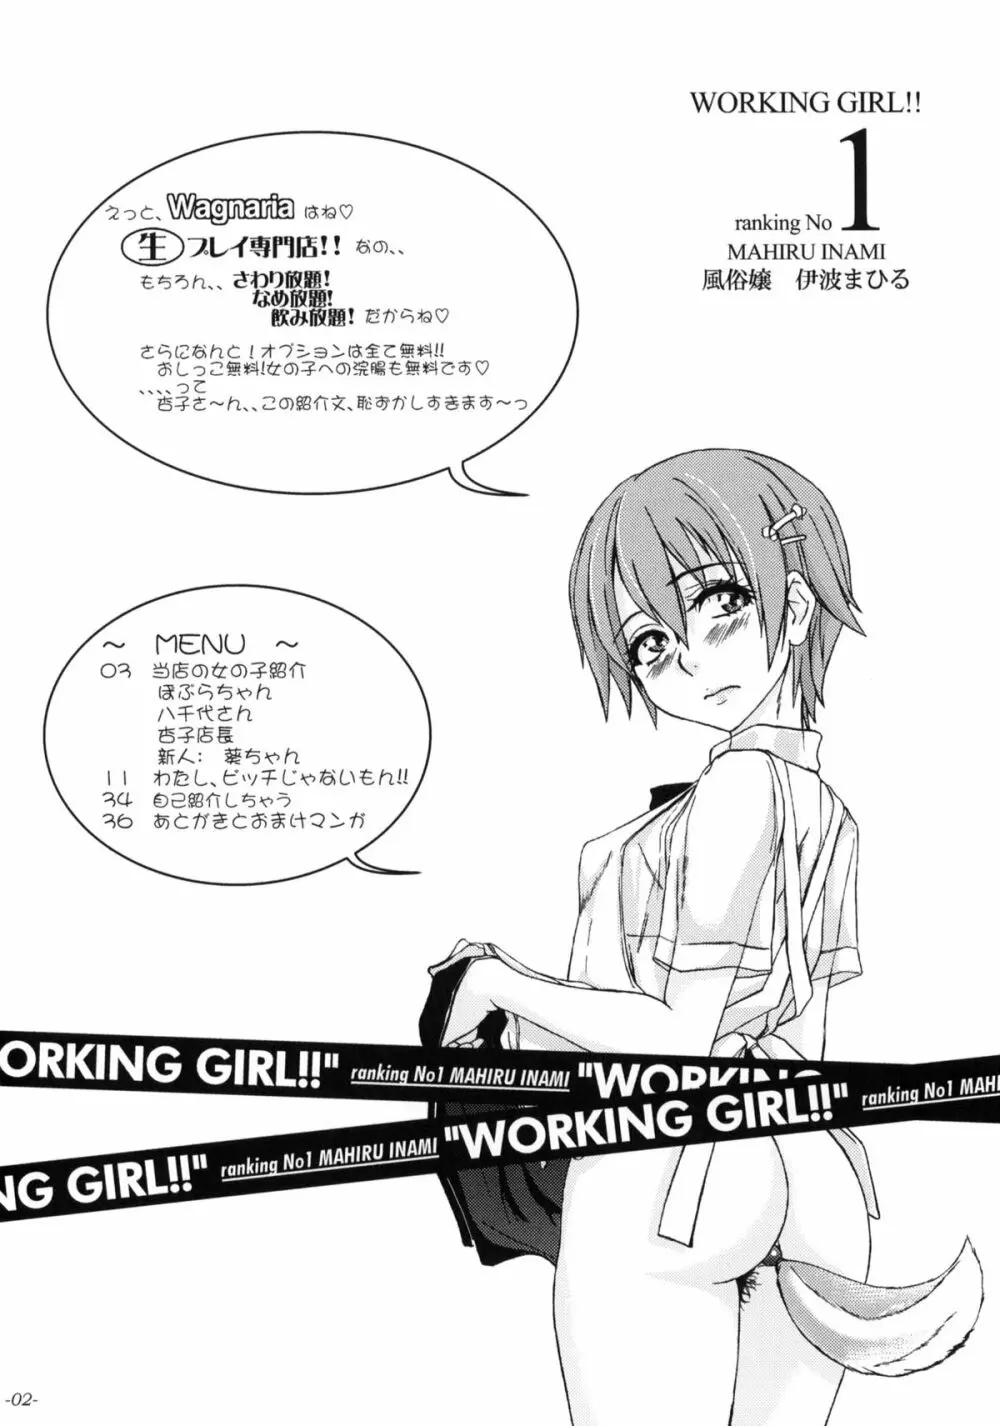 WORKING GIRL!! ranking No 1 風俗嬢 伊波まひる Page.3